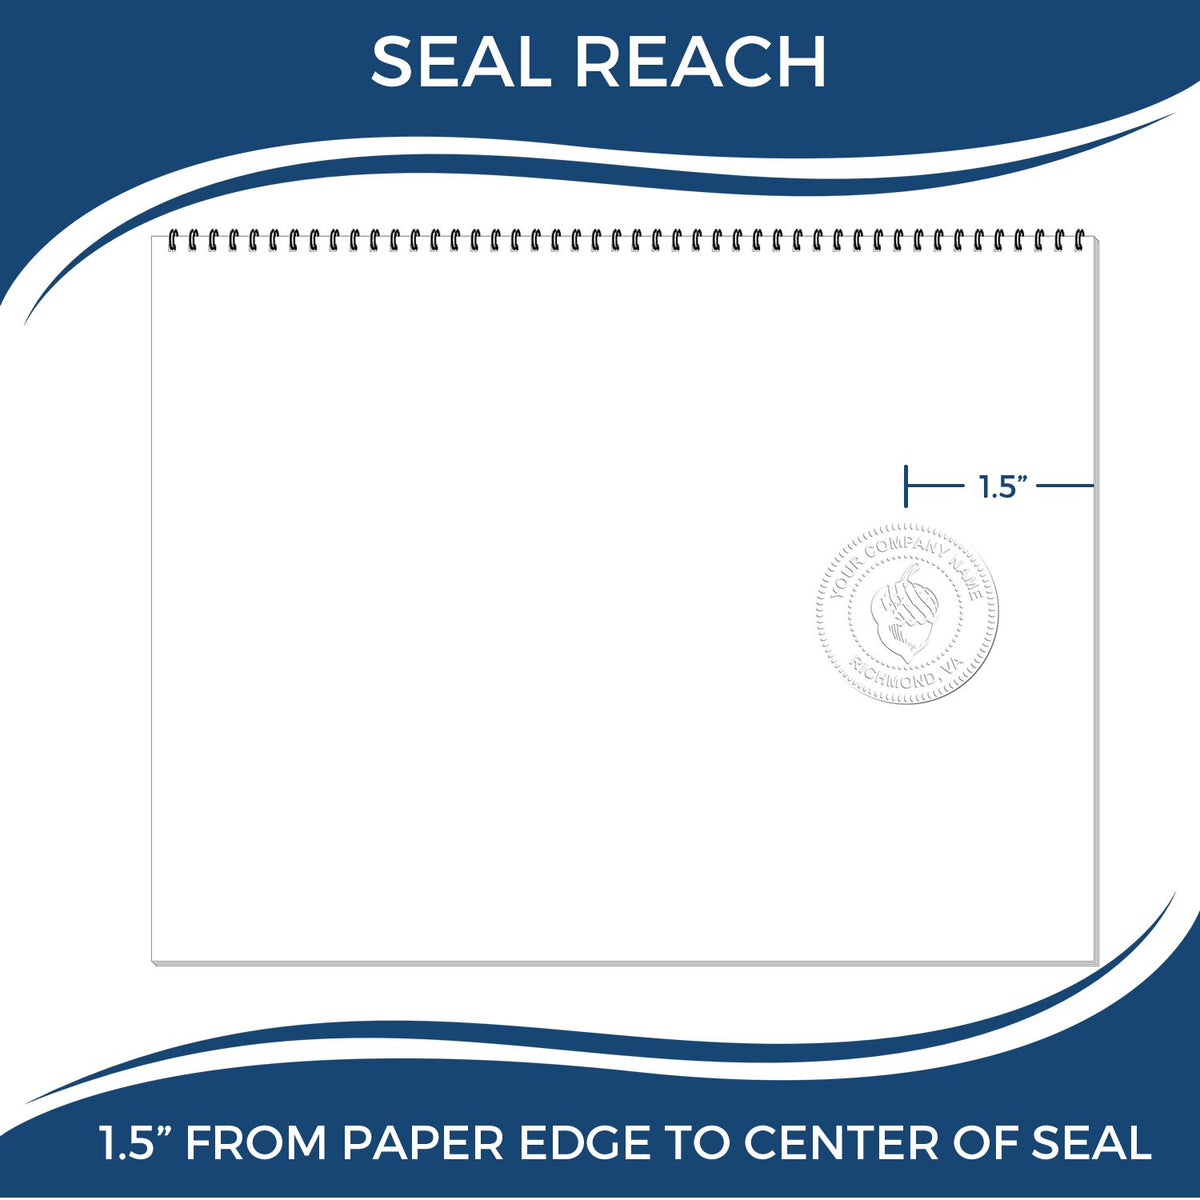 An infographic showing the seal reach which is represented by a ruler and a miniature seal image of the State of Florida Soft Land Surveyor Embossing Seal